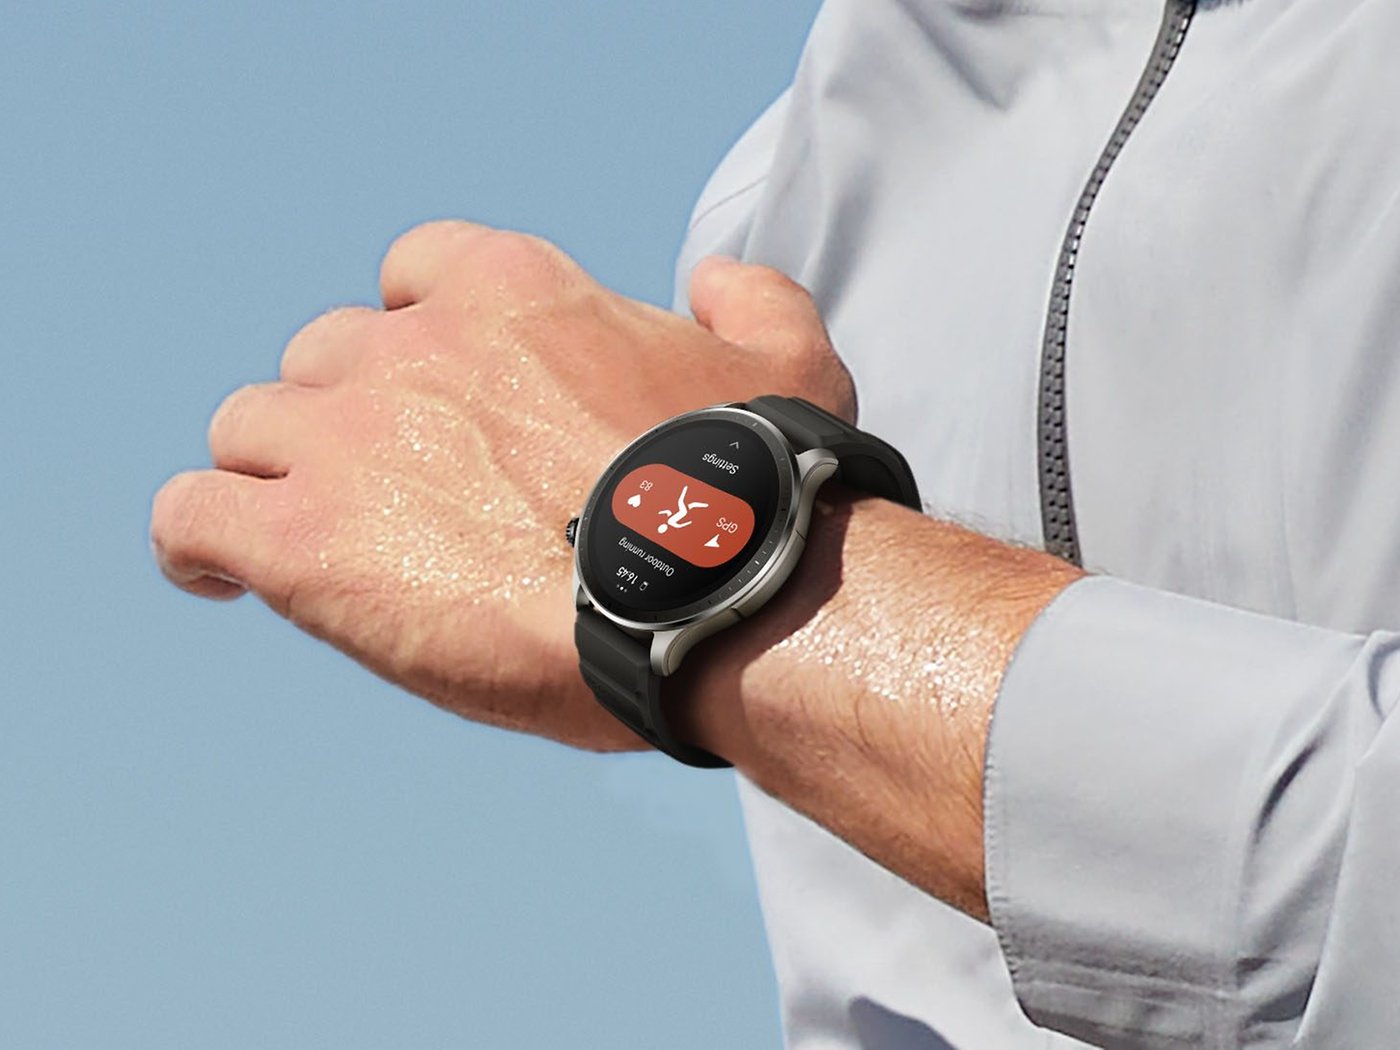 Amazfit GTR 4 and GTS 4 (Mini): New sports watches with great GPS